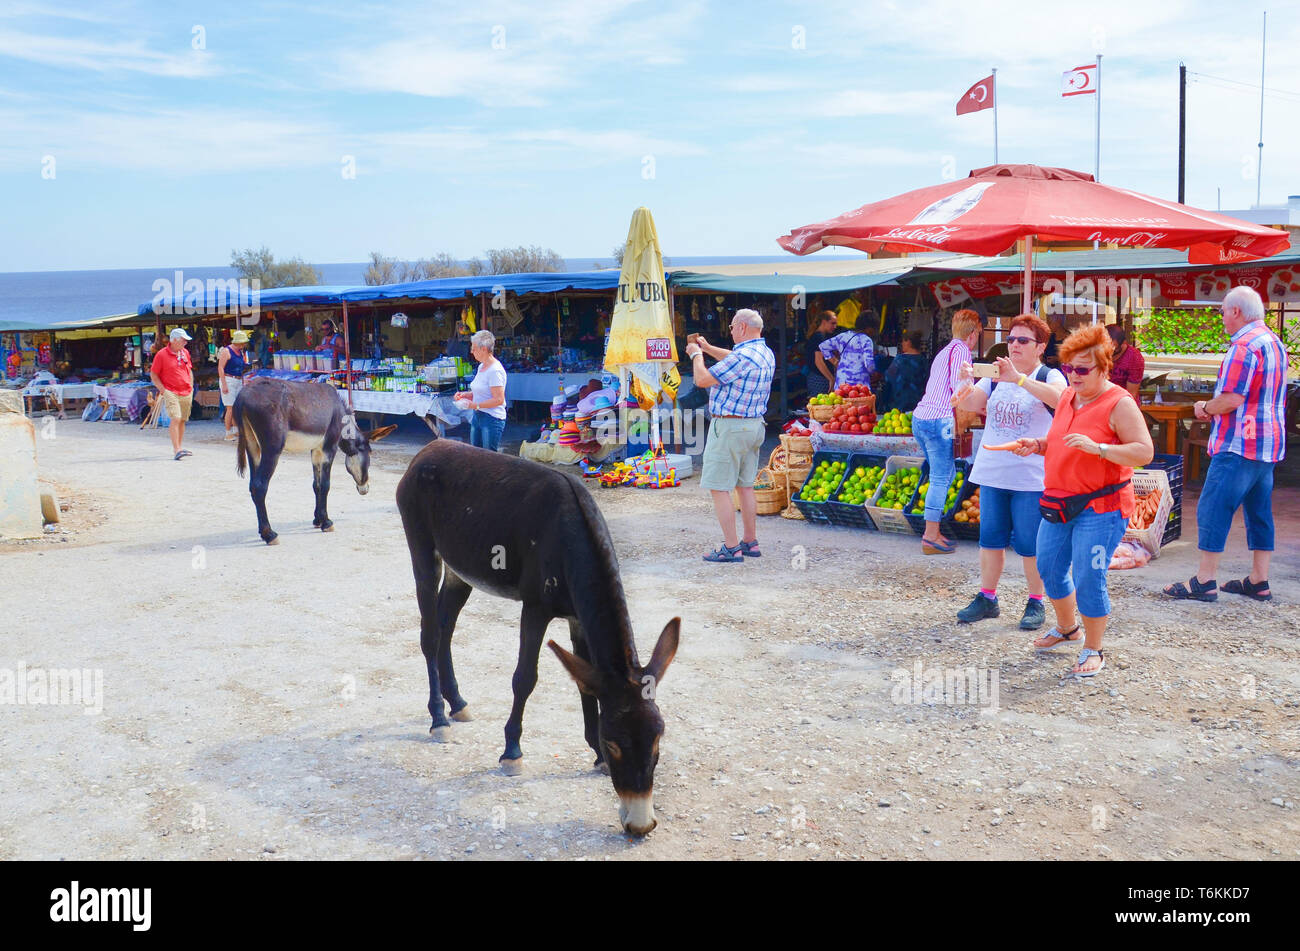 Dipkarpaz, Karpas Peninsula, Northern Cyprus - Oct 3rd 2018: Several older tourists taking pictures of wild donkeys with phones. Taken on a traditional market with fruit and souvenirs. Stock Photo